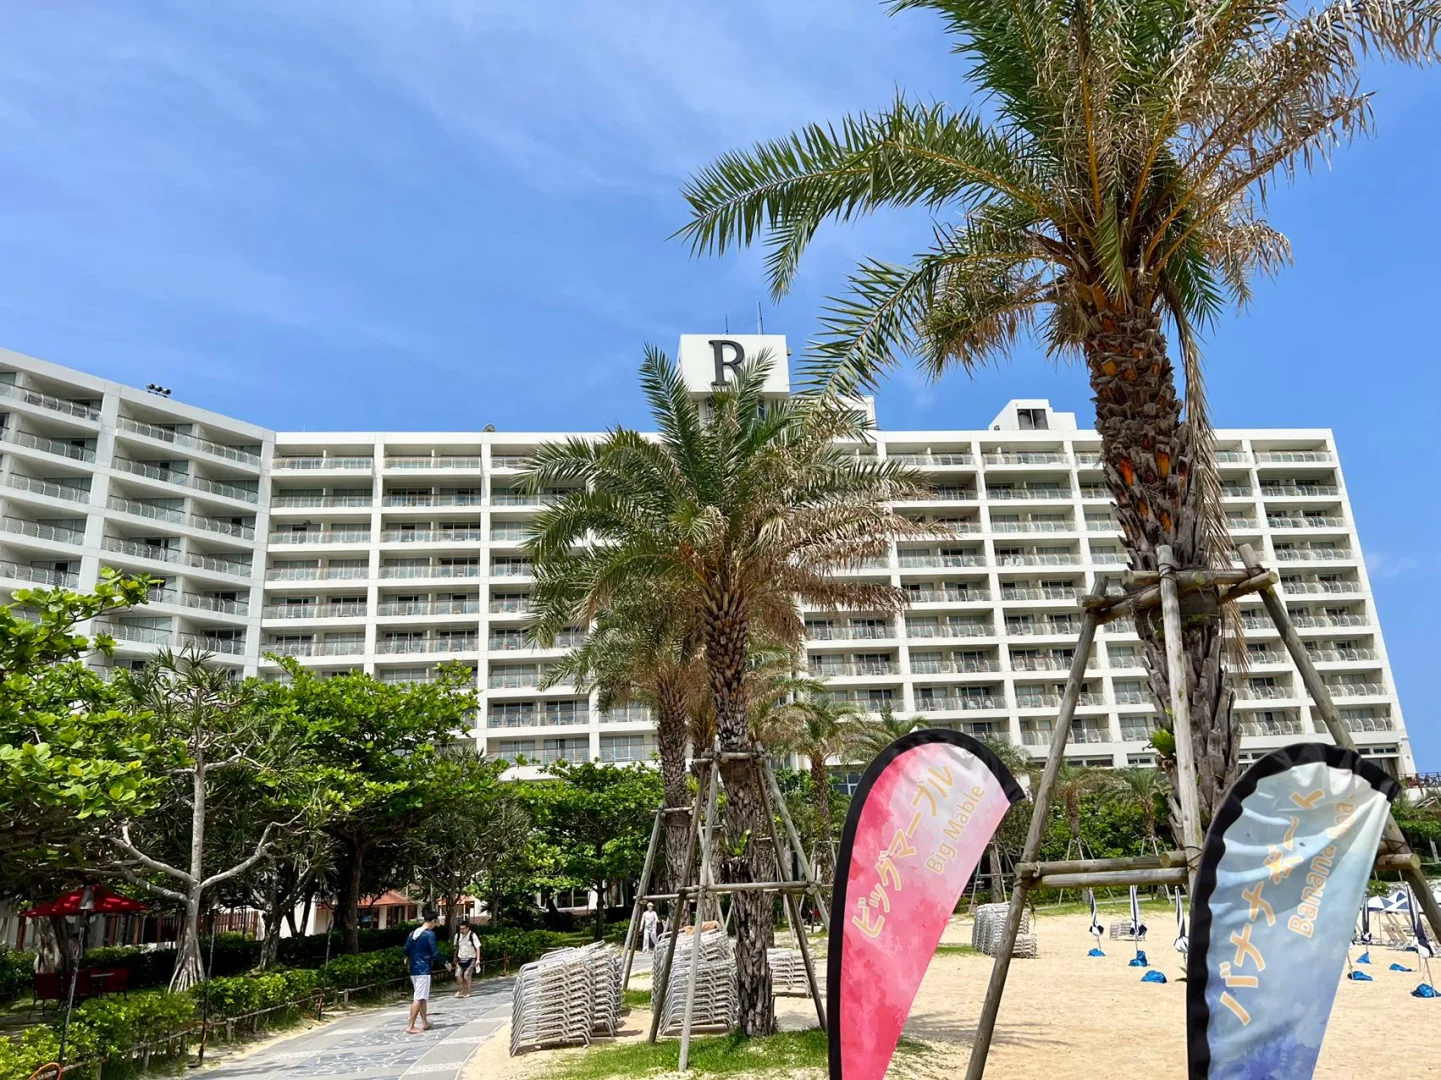 Okinawa-Renaissance Okinawa Hotel is suitable for family travel and you can feed manta rays